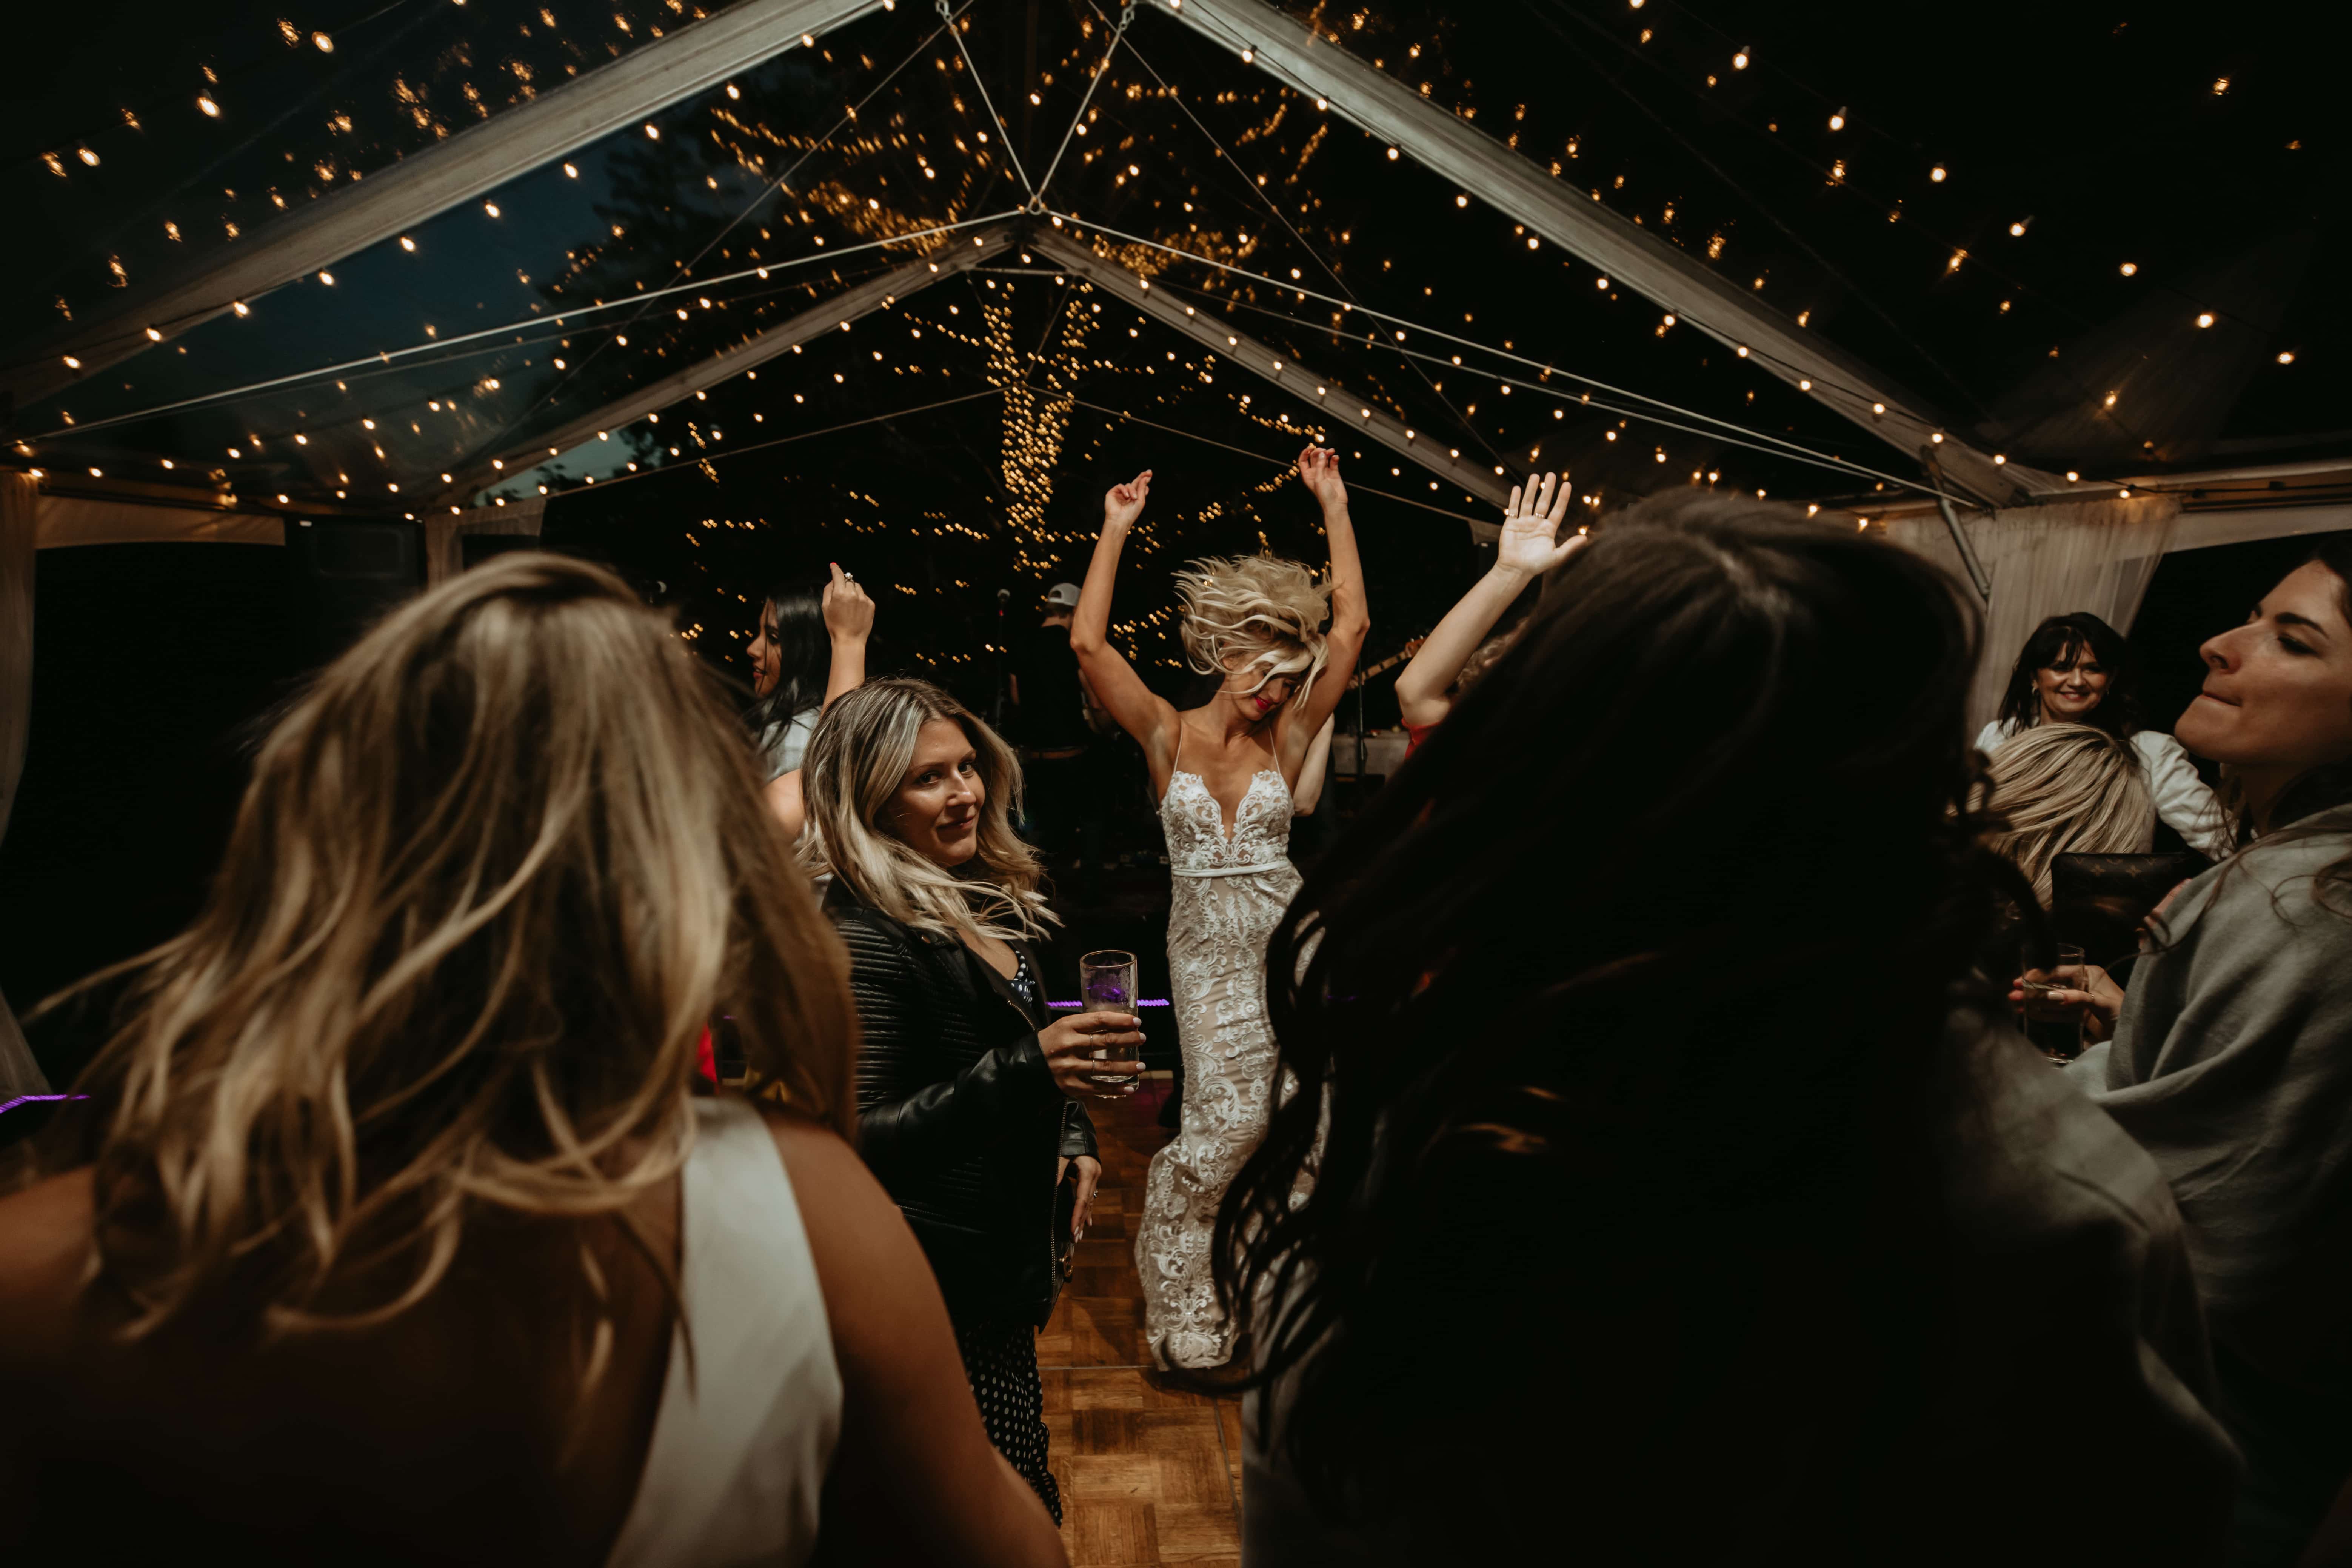 Fairy lights above wedding party reception with people dancing and enjoying lighting installation